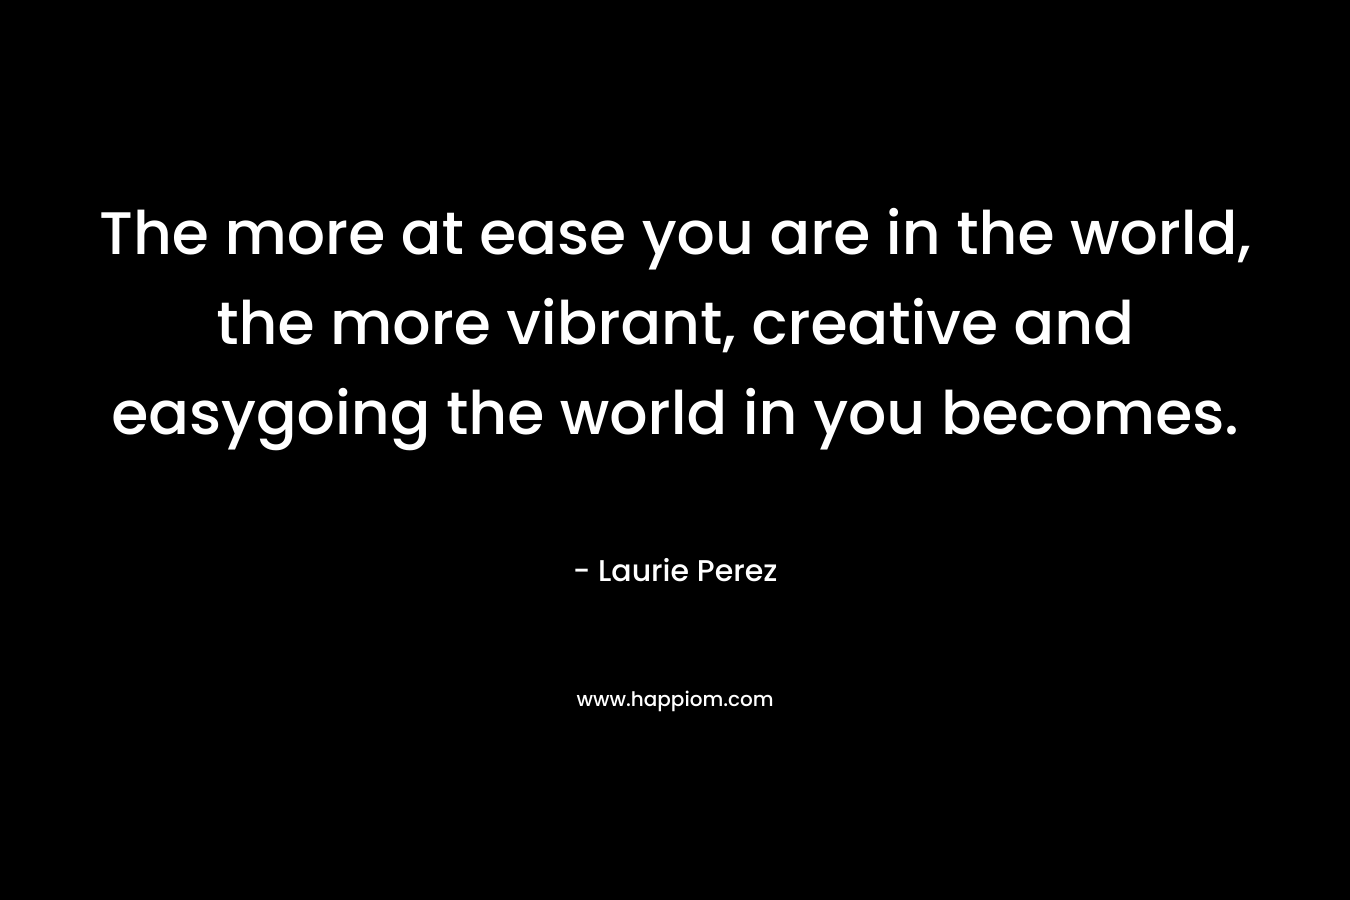 The more at ease you are in the world, the more vibrant, creative and easygoing the world in you becomes.